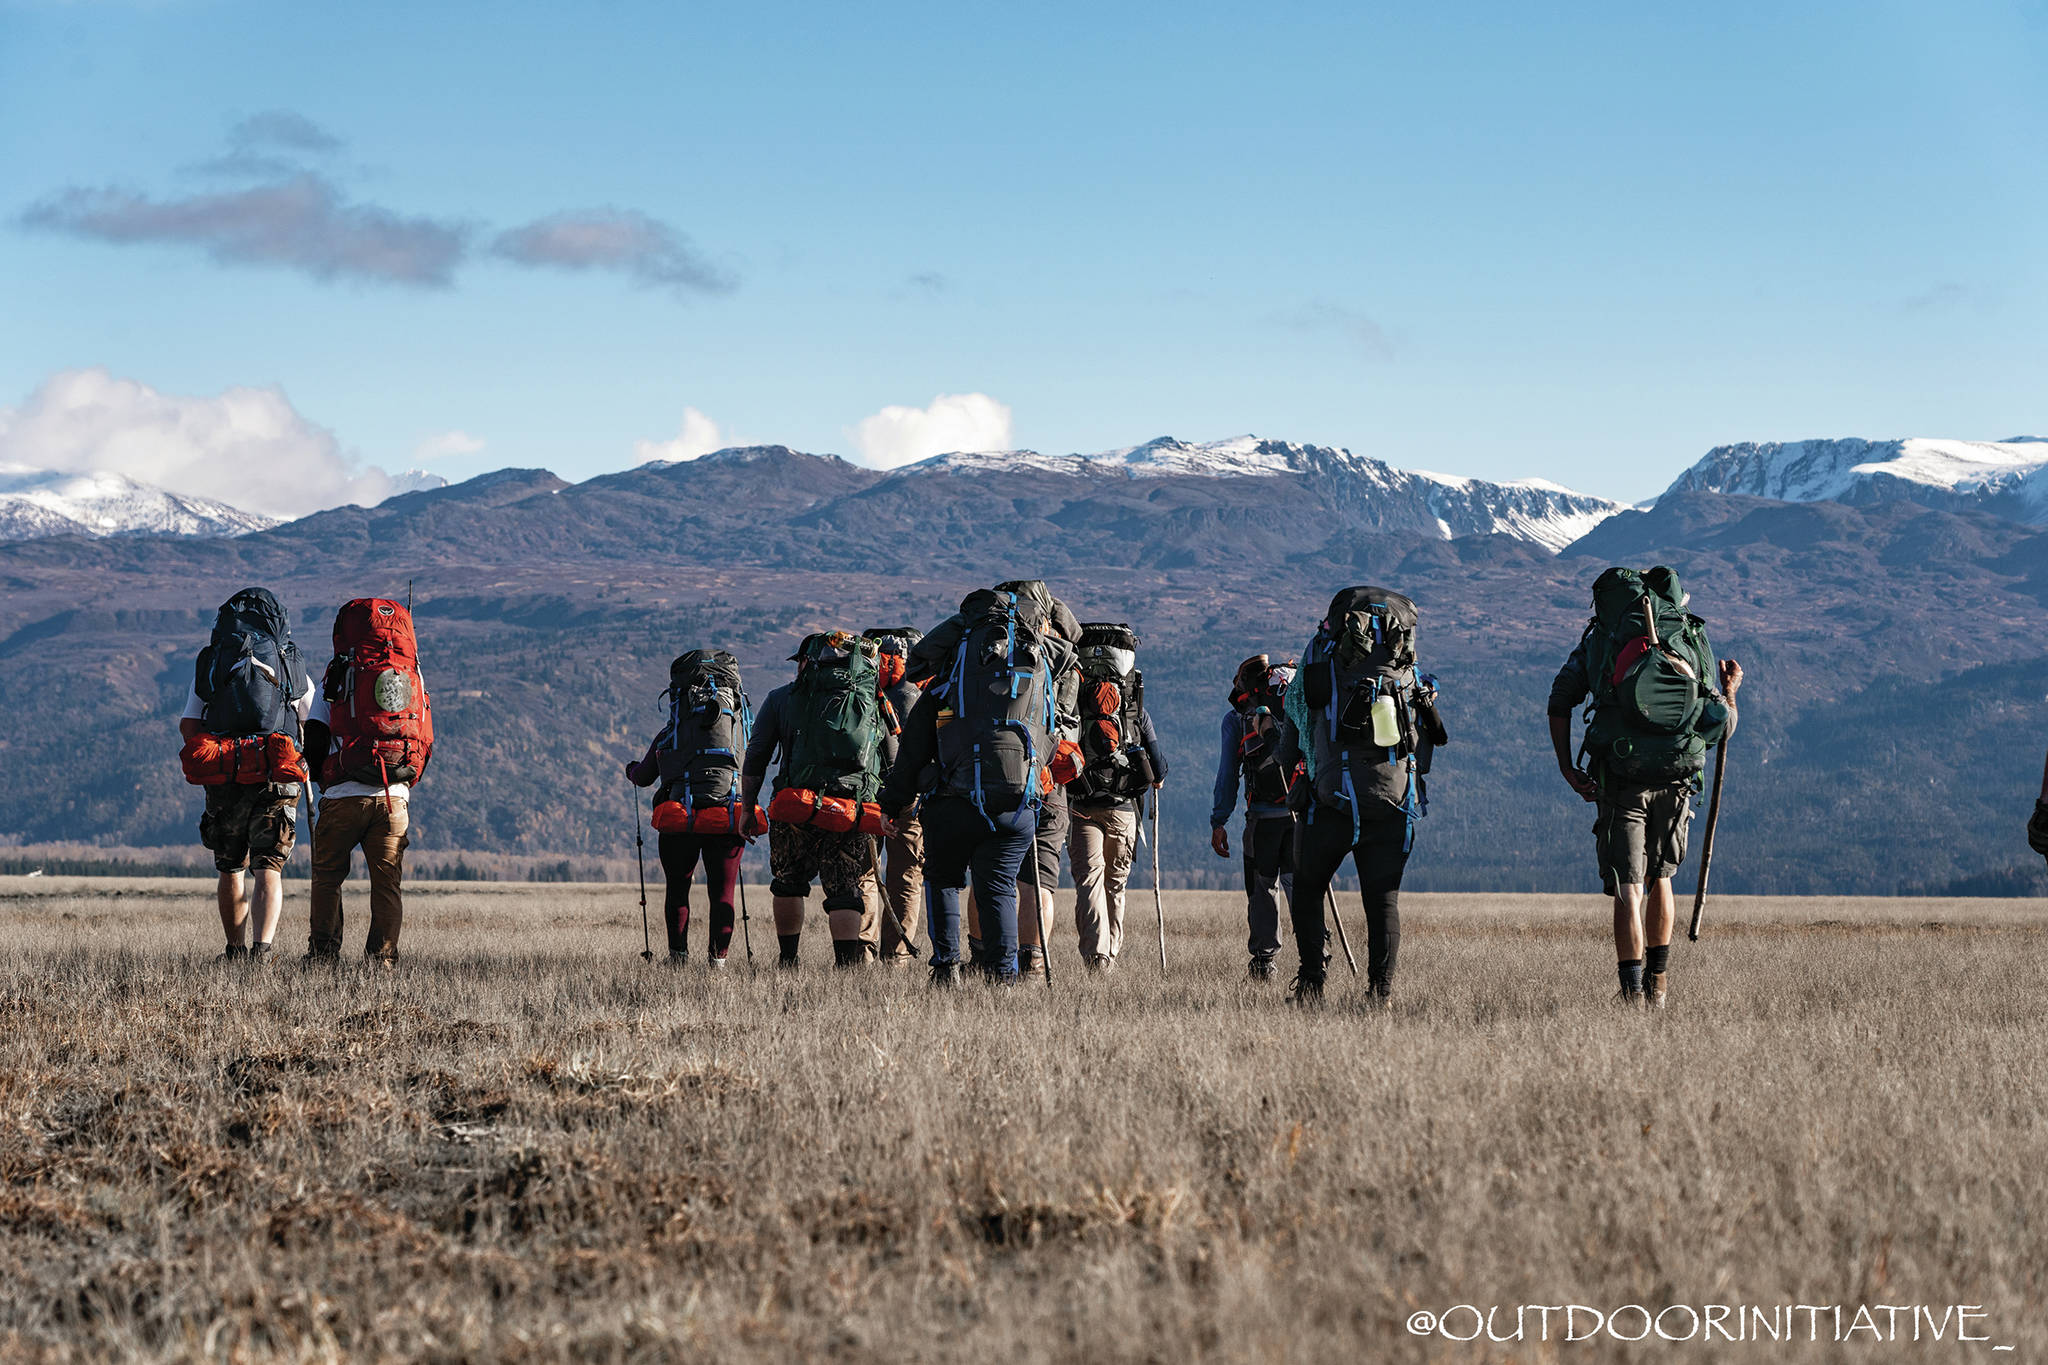 Veterans who participated in the 23rd Veteran trip to Homer, Alaska, hike in the Fox River Flats during their trip Oct. 11 to 16, 2020, near Homer, Alaska. (Photo by Anthony Droz/Outdoor Initiative)